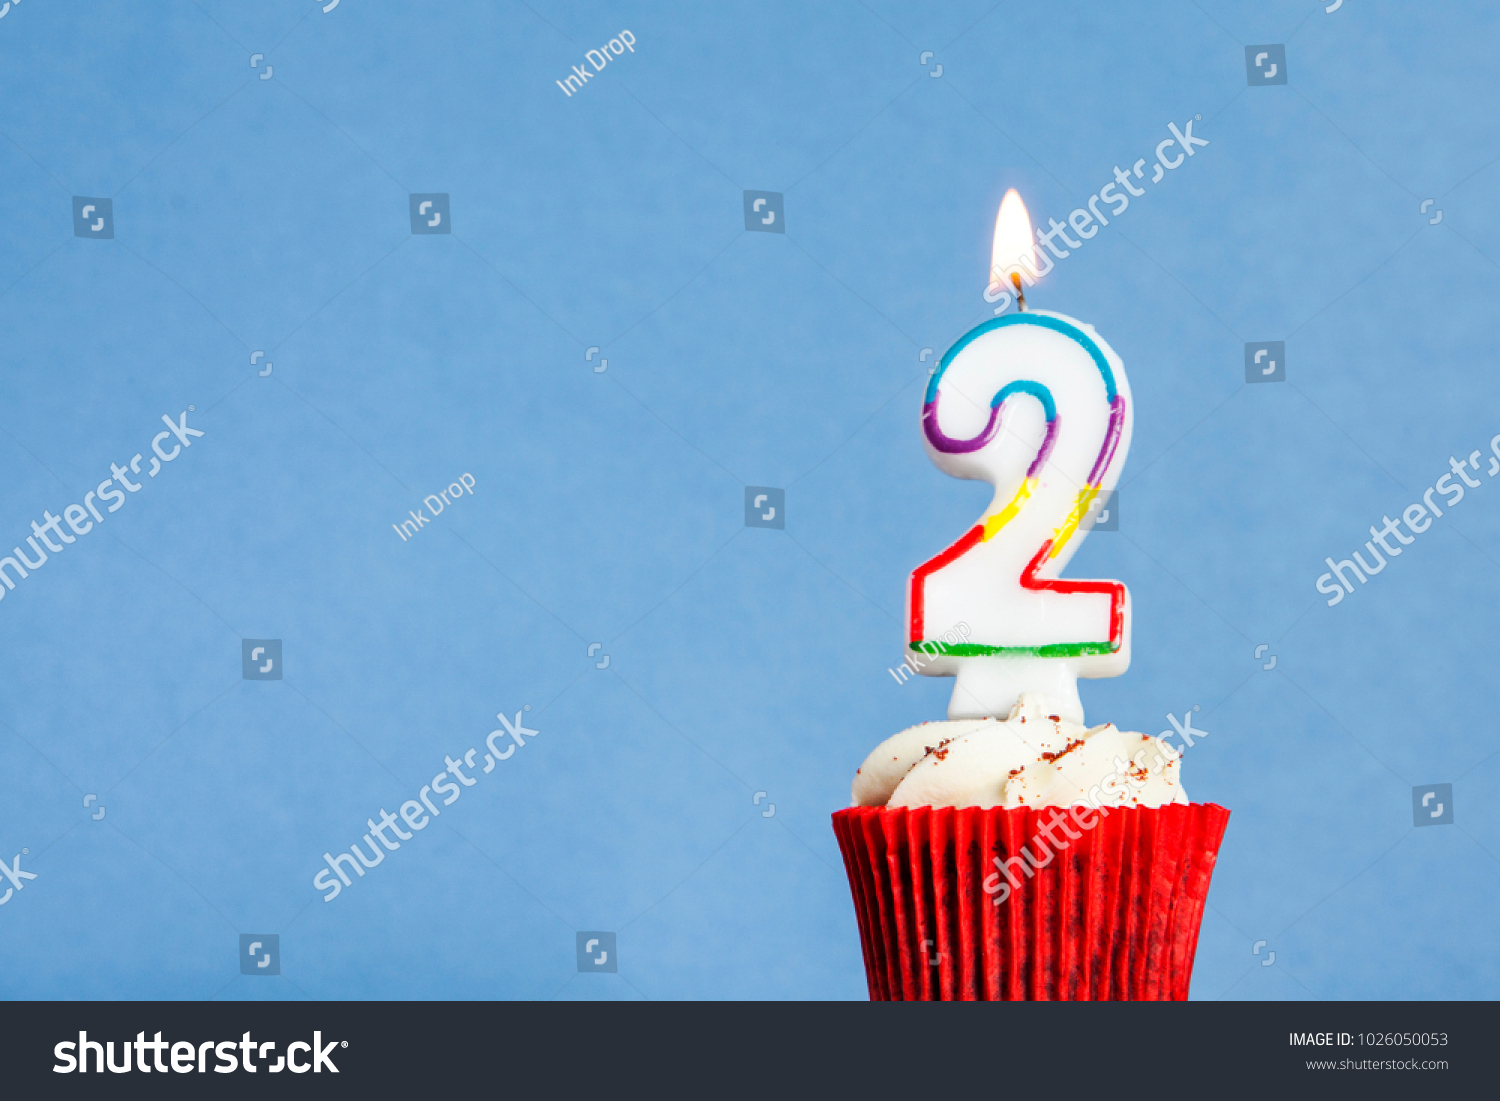 Number 2 birthday candle in a cupcake against a blue background #1026050053